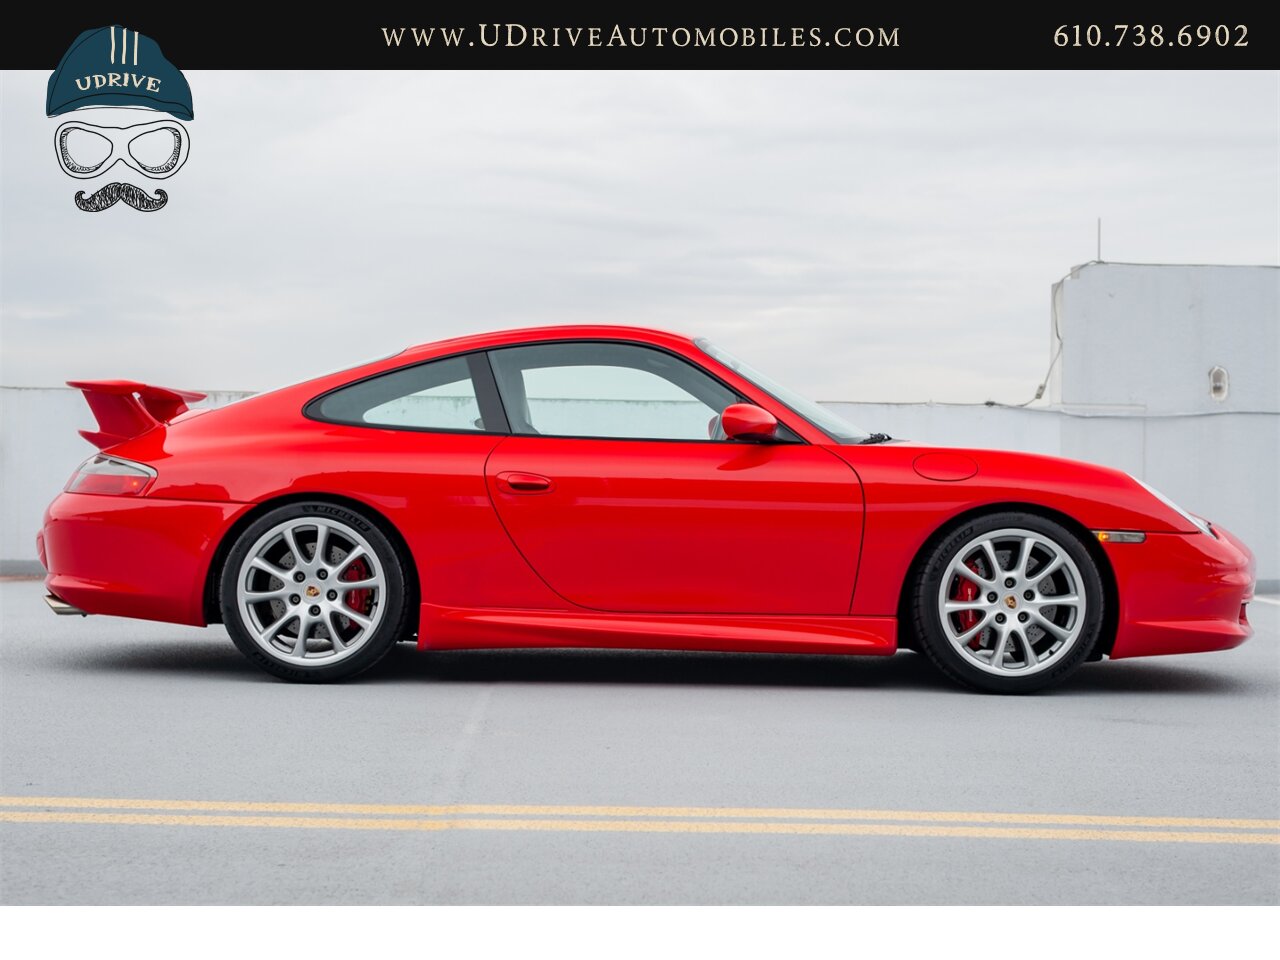 2004 Porsche 911 996 GT3 Guards Red Sport Seats Painted Hardbacks  Painted Center Console 18k Miles - Photo 19 - West Chester, PA 19382